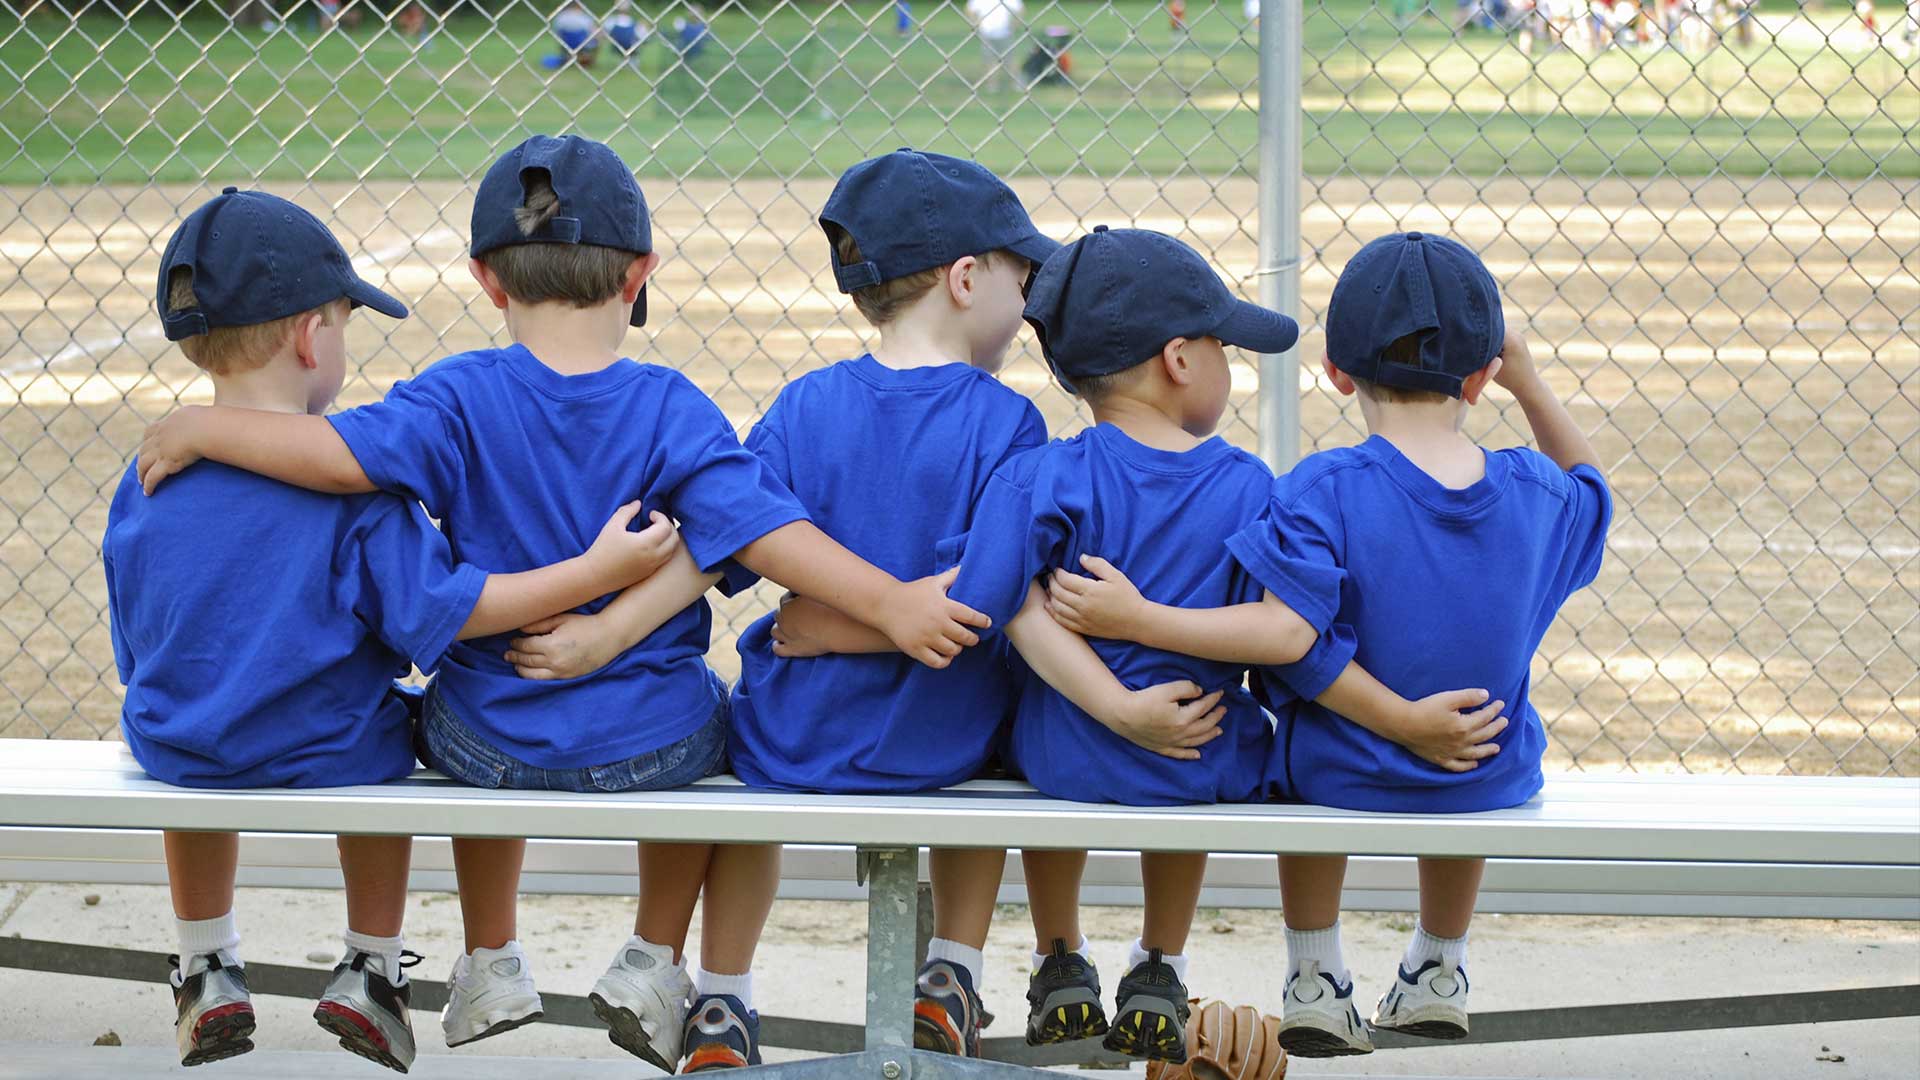 kids sitting on the bench in baseball uniforms